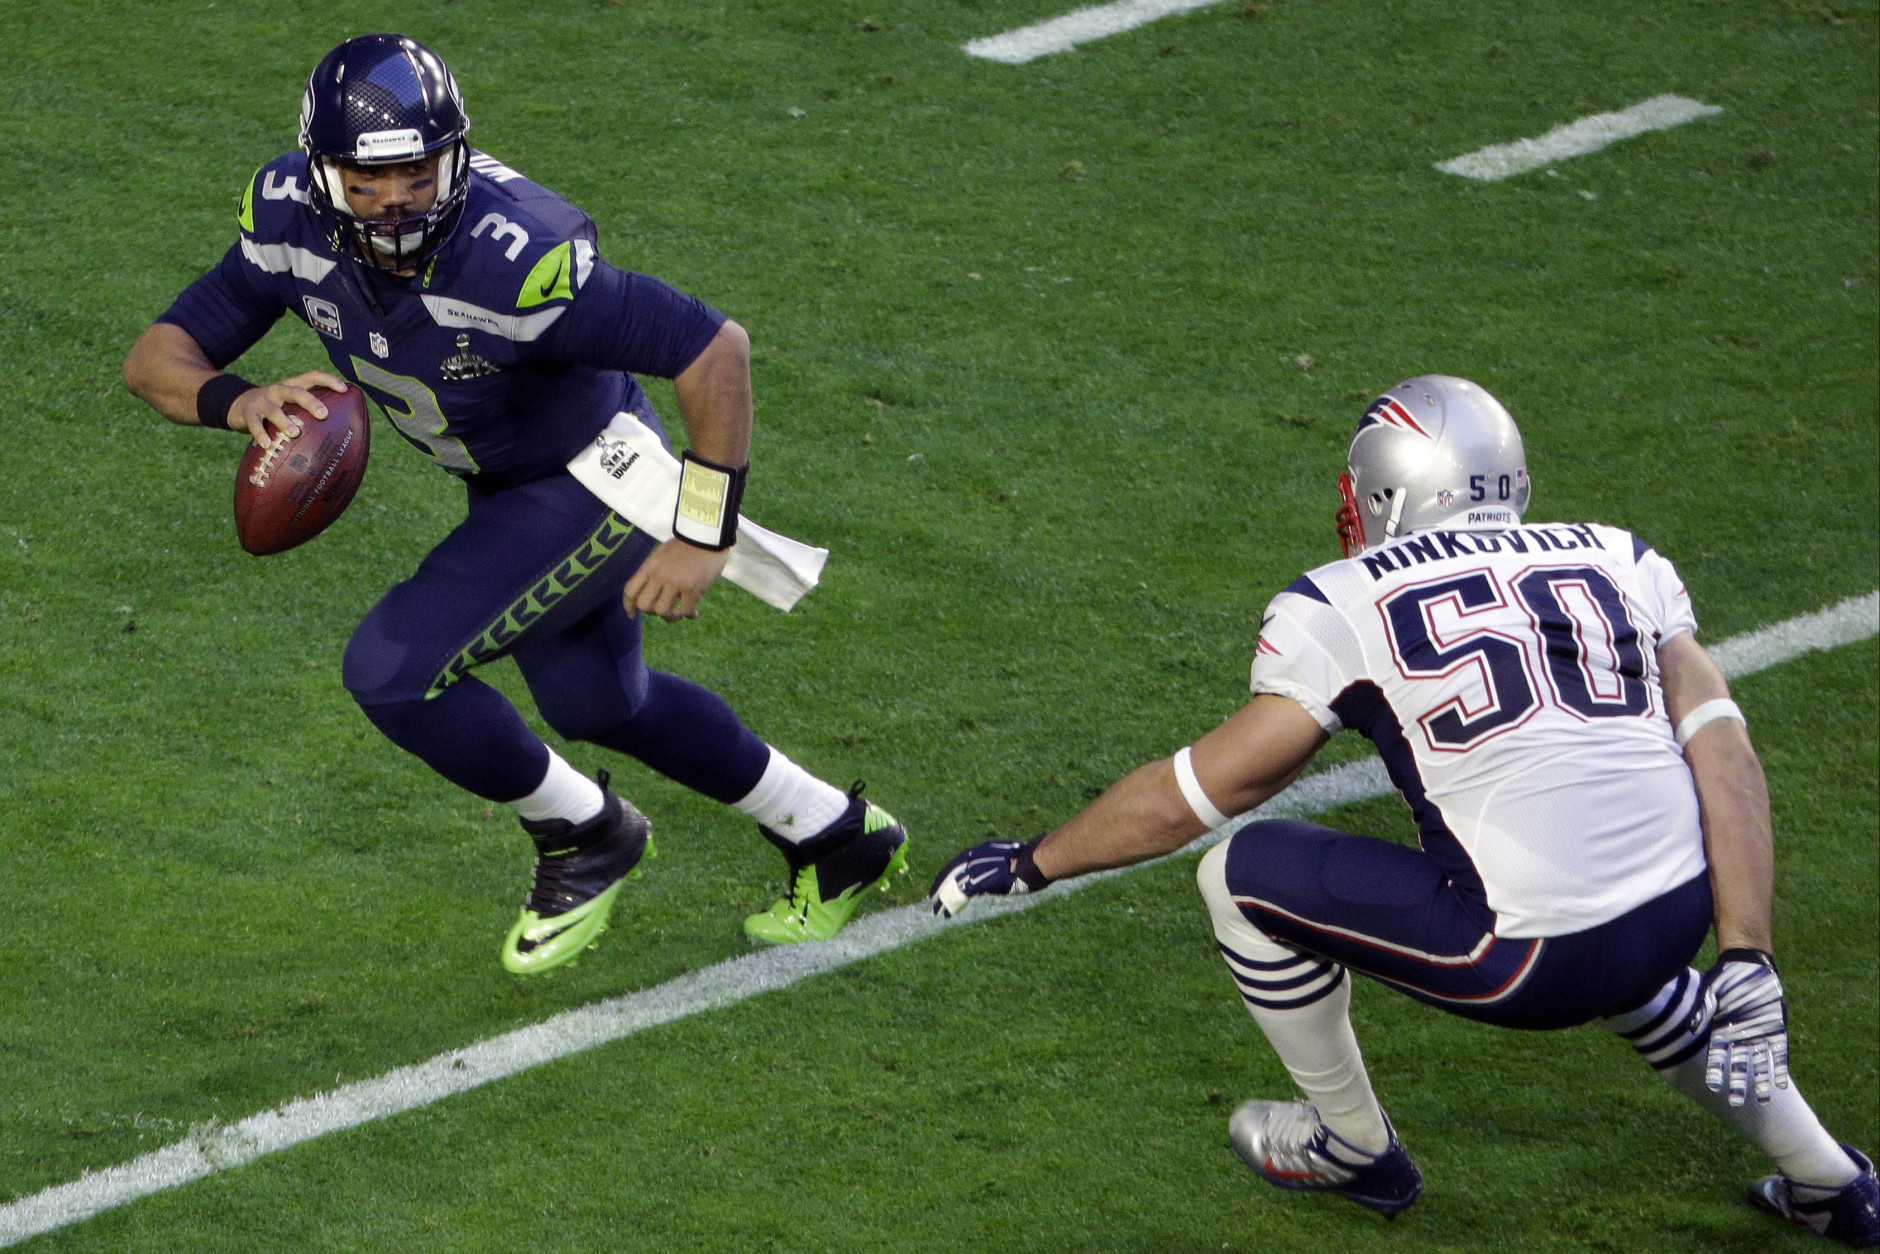 Seattle Seahawks quarterback Russell Wilson (3) scrambles away from New England Patriots defensive end Rob Ninkovich (50) during the first half of NFL Super Bowl XLIX football game Sunday, Feb. 1, 2015, in Glendale, Ariz. (AP Photo/Charlie Riedel)